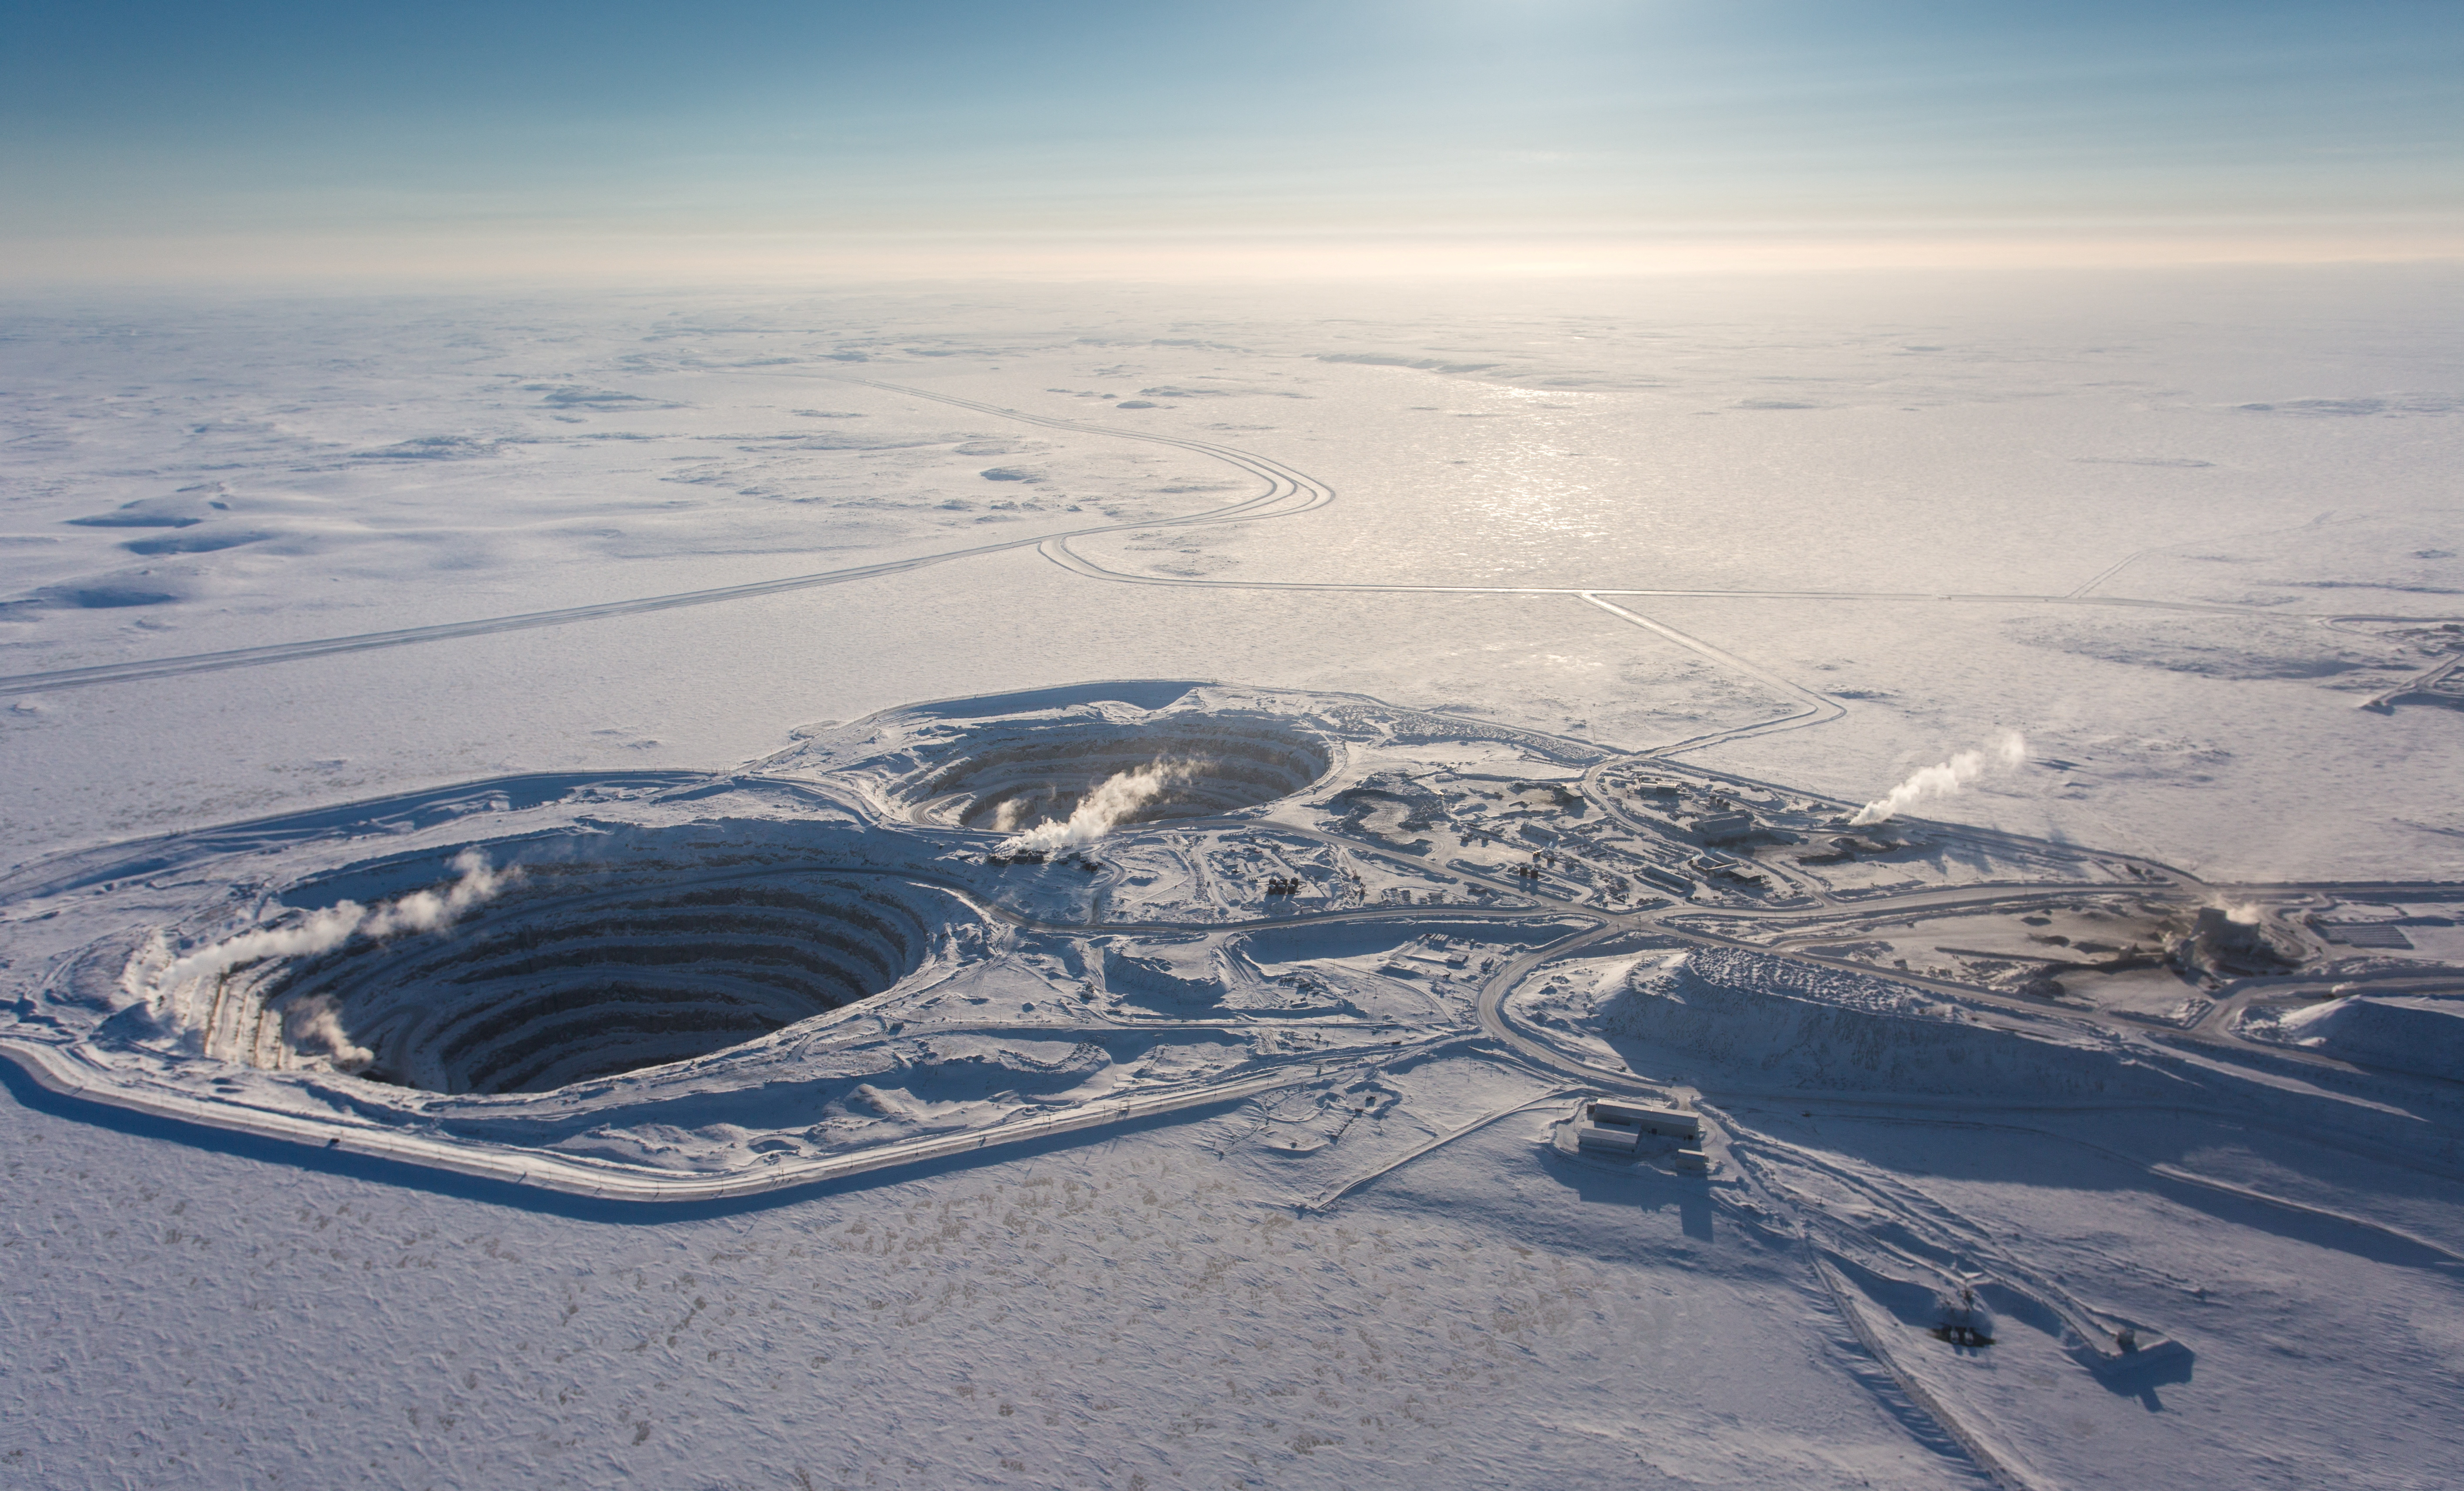 The winter road is seen in the background of an aerial photograph of Rio Tinto's Diavik Diamond Mine